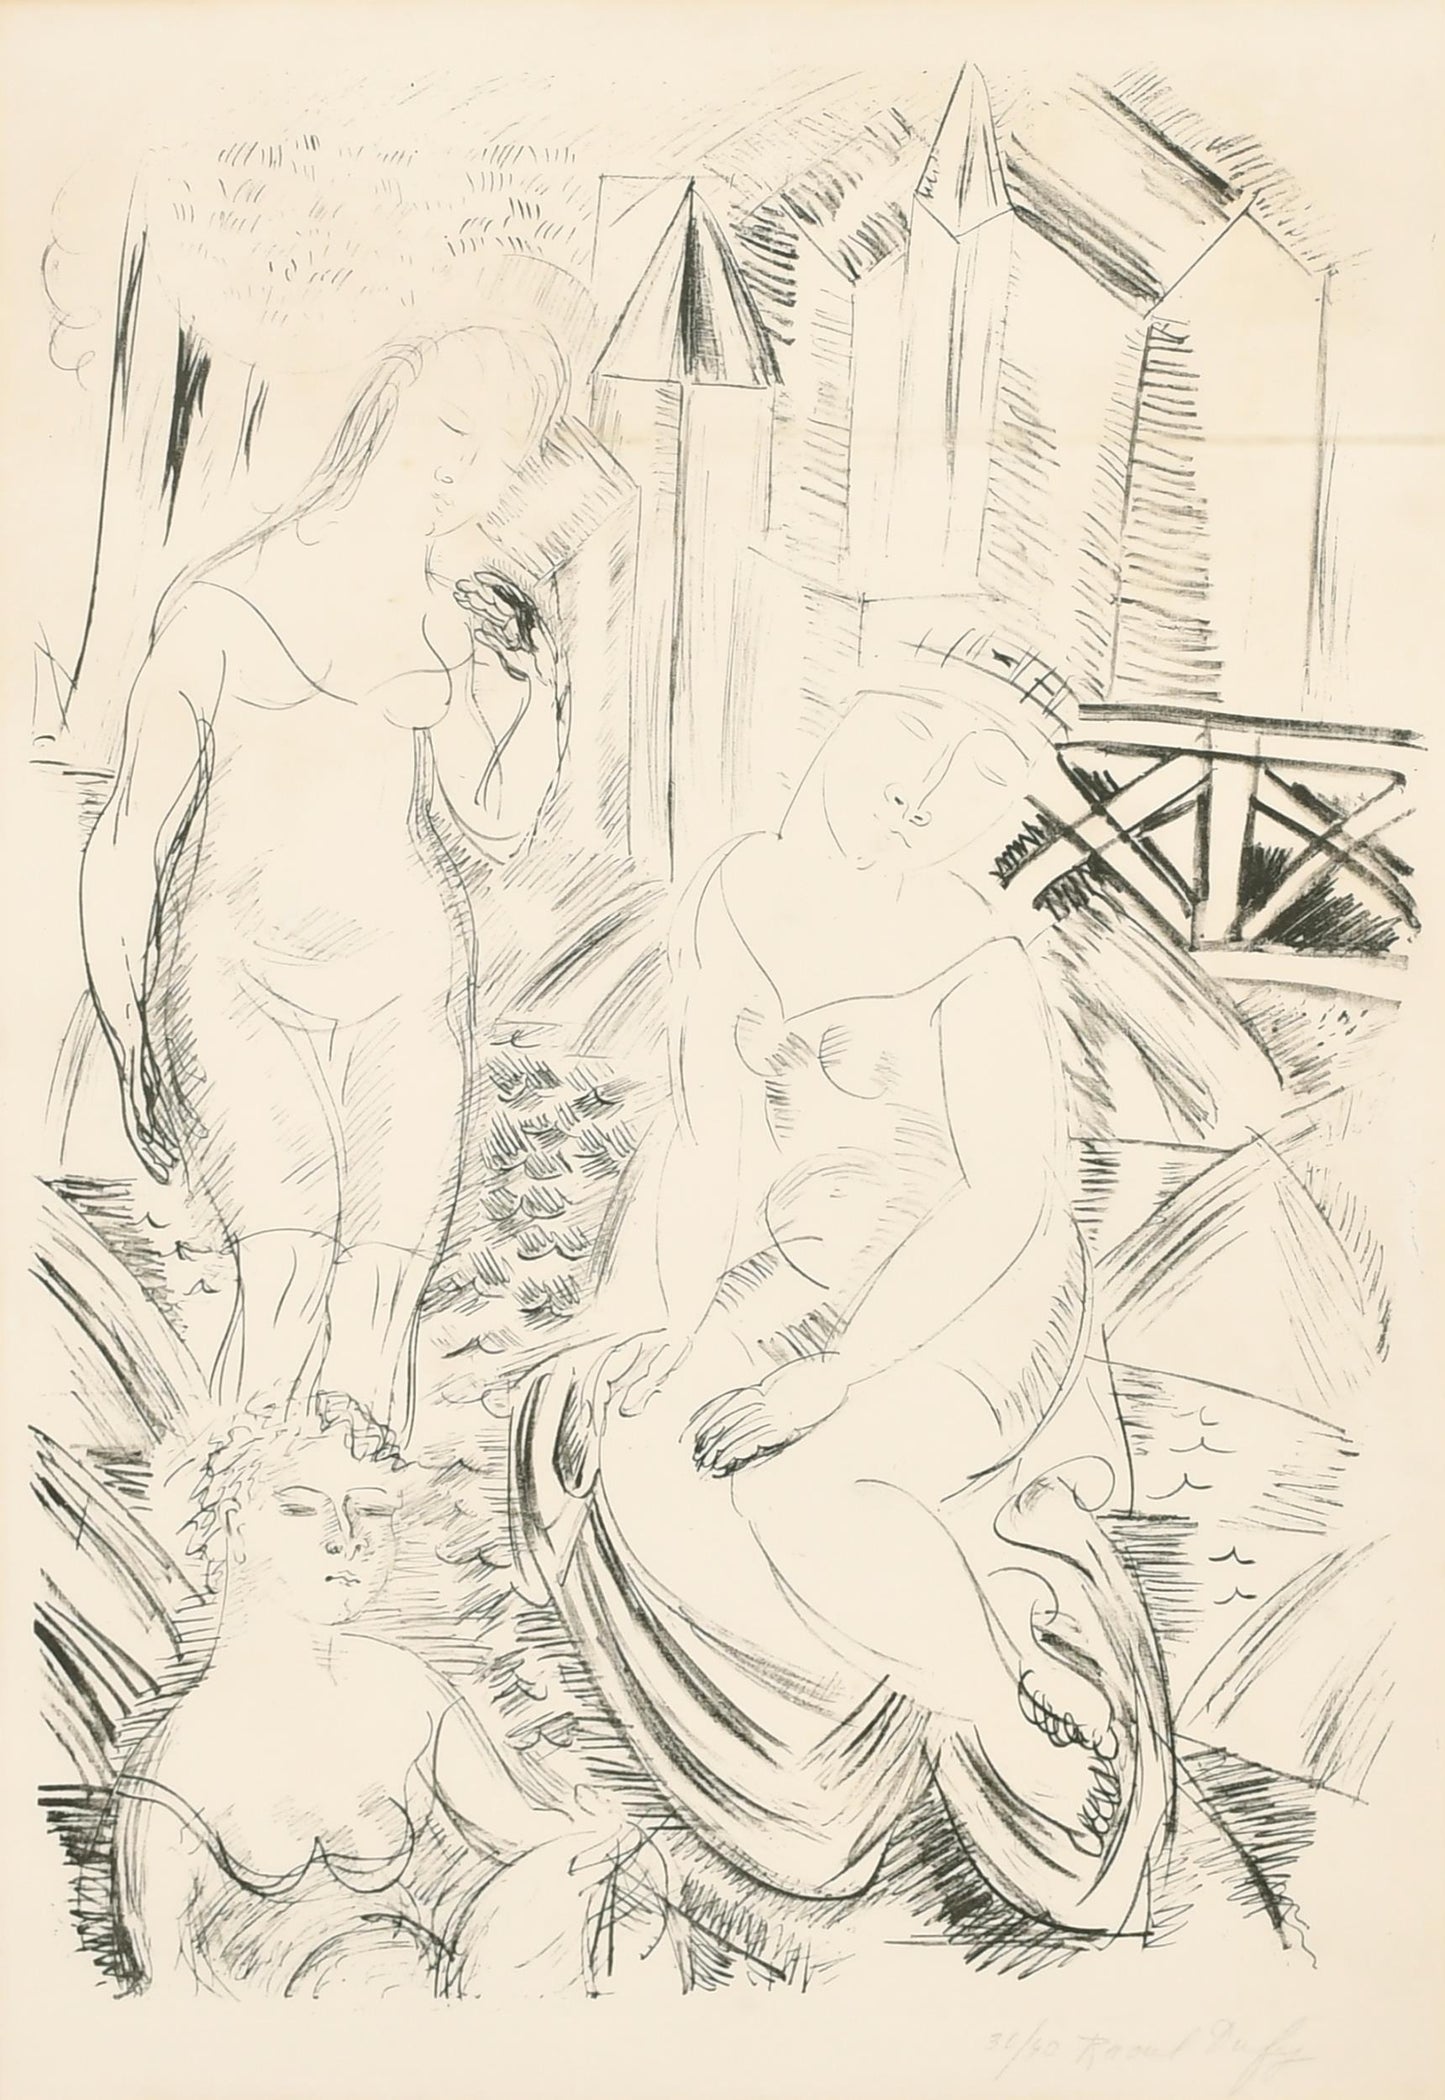 RAOUL DUFY 1877-1953 SIGNED AND NUMBERED LITHO "BATHERS" 1925